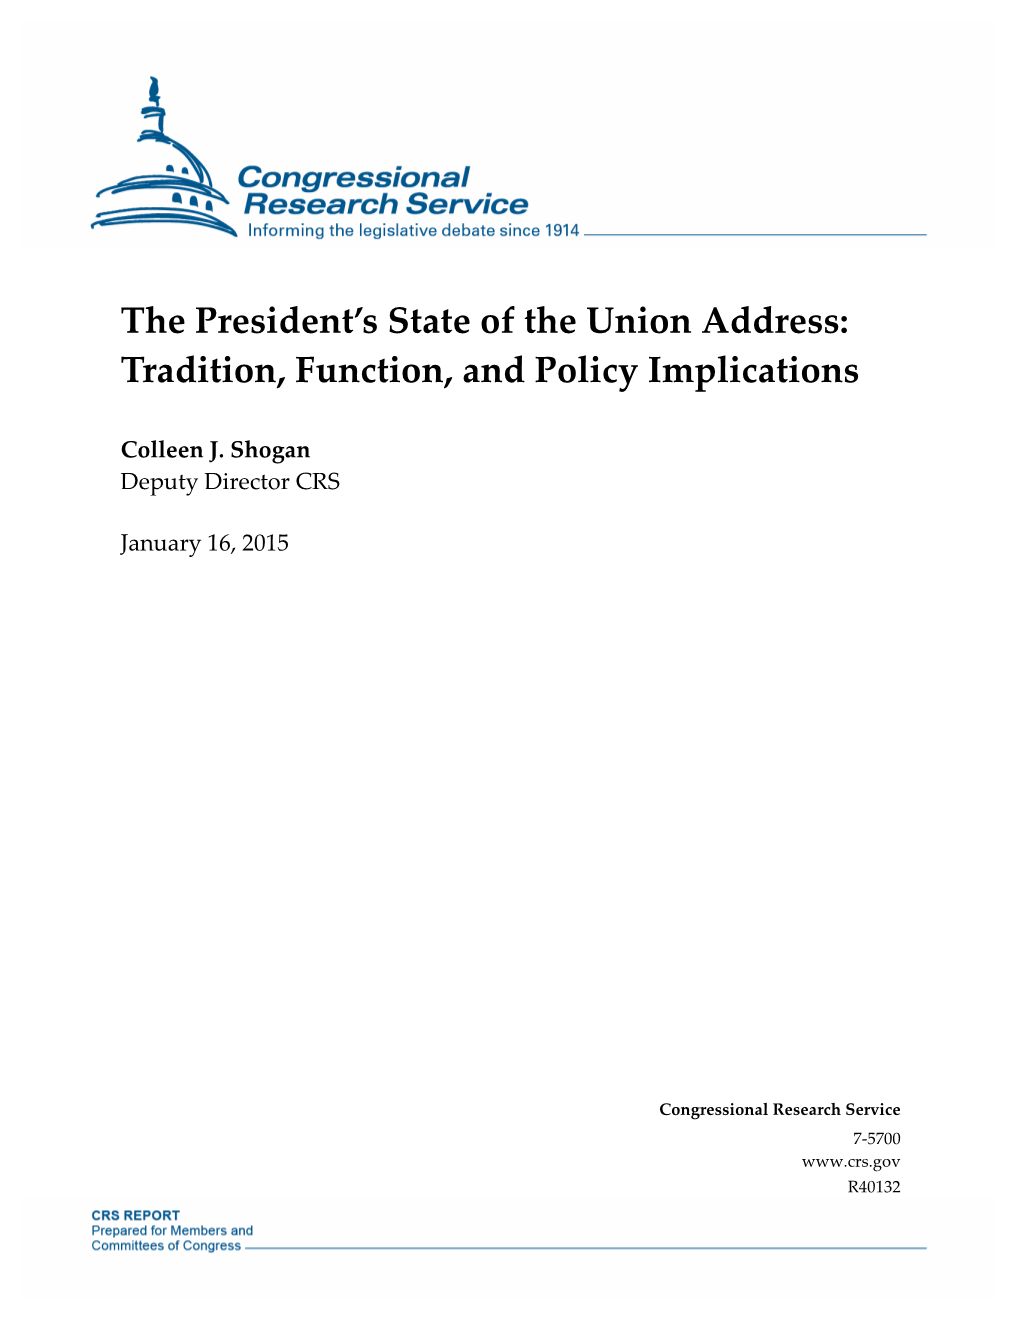 The President's State of the Union Address: Tradition, Function, And